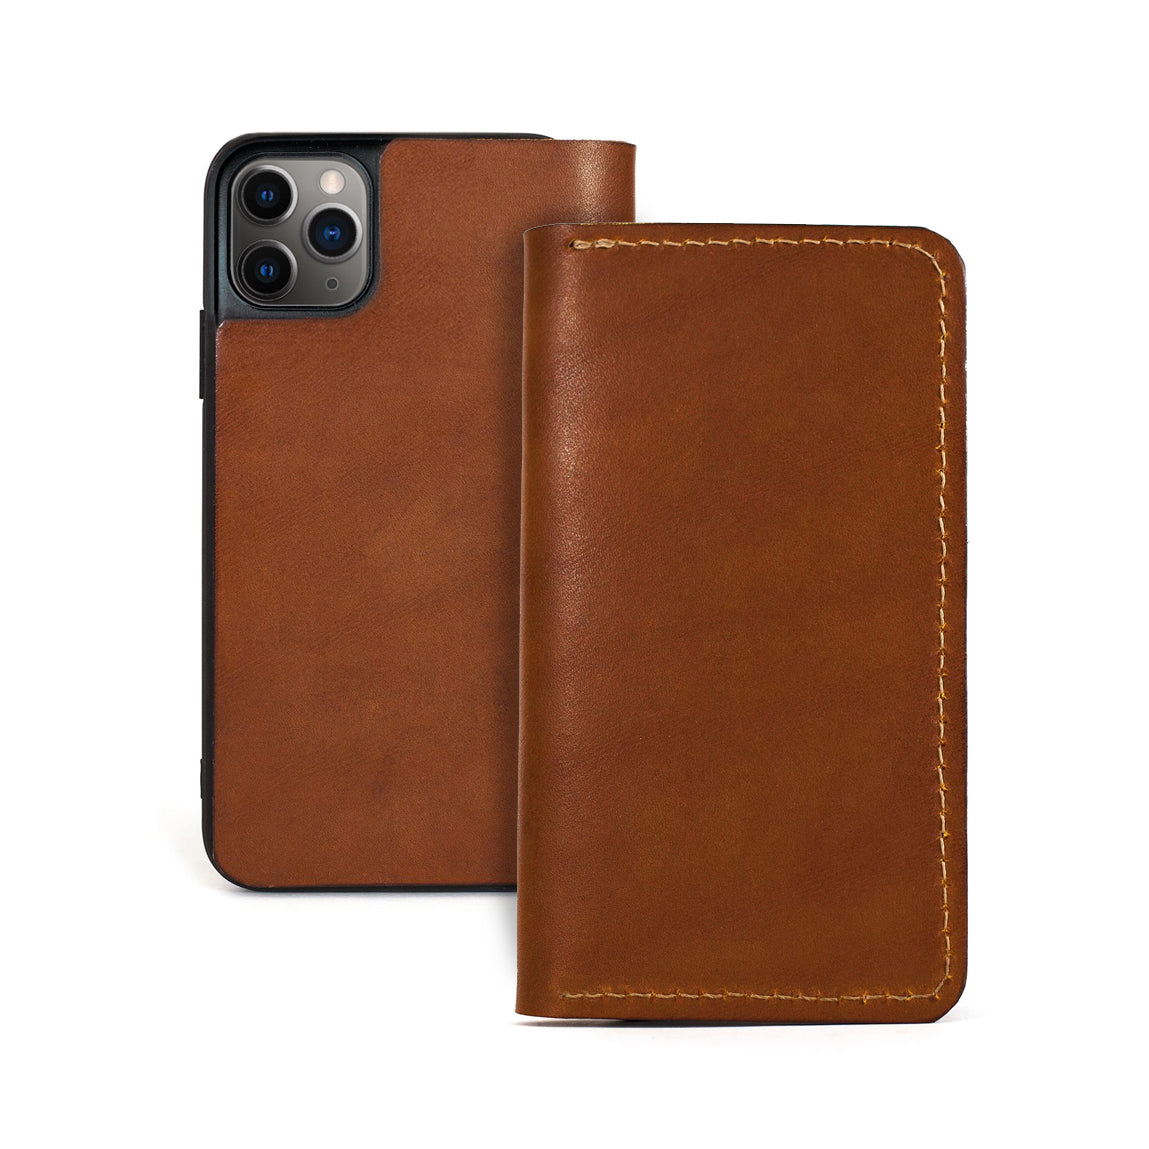 iphone 11pro, iphone 11, pro max, iphone leather case, iphone wallet, new iphone, leather iphone 11pro case, iphone xr, iphone xs max, iphone x